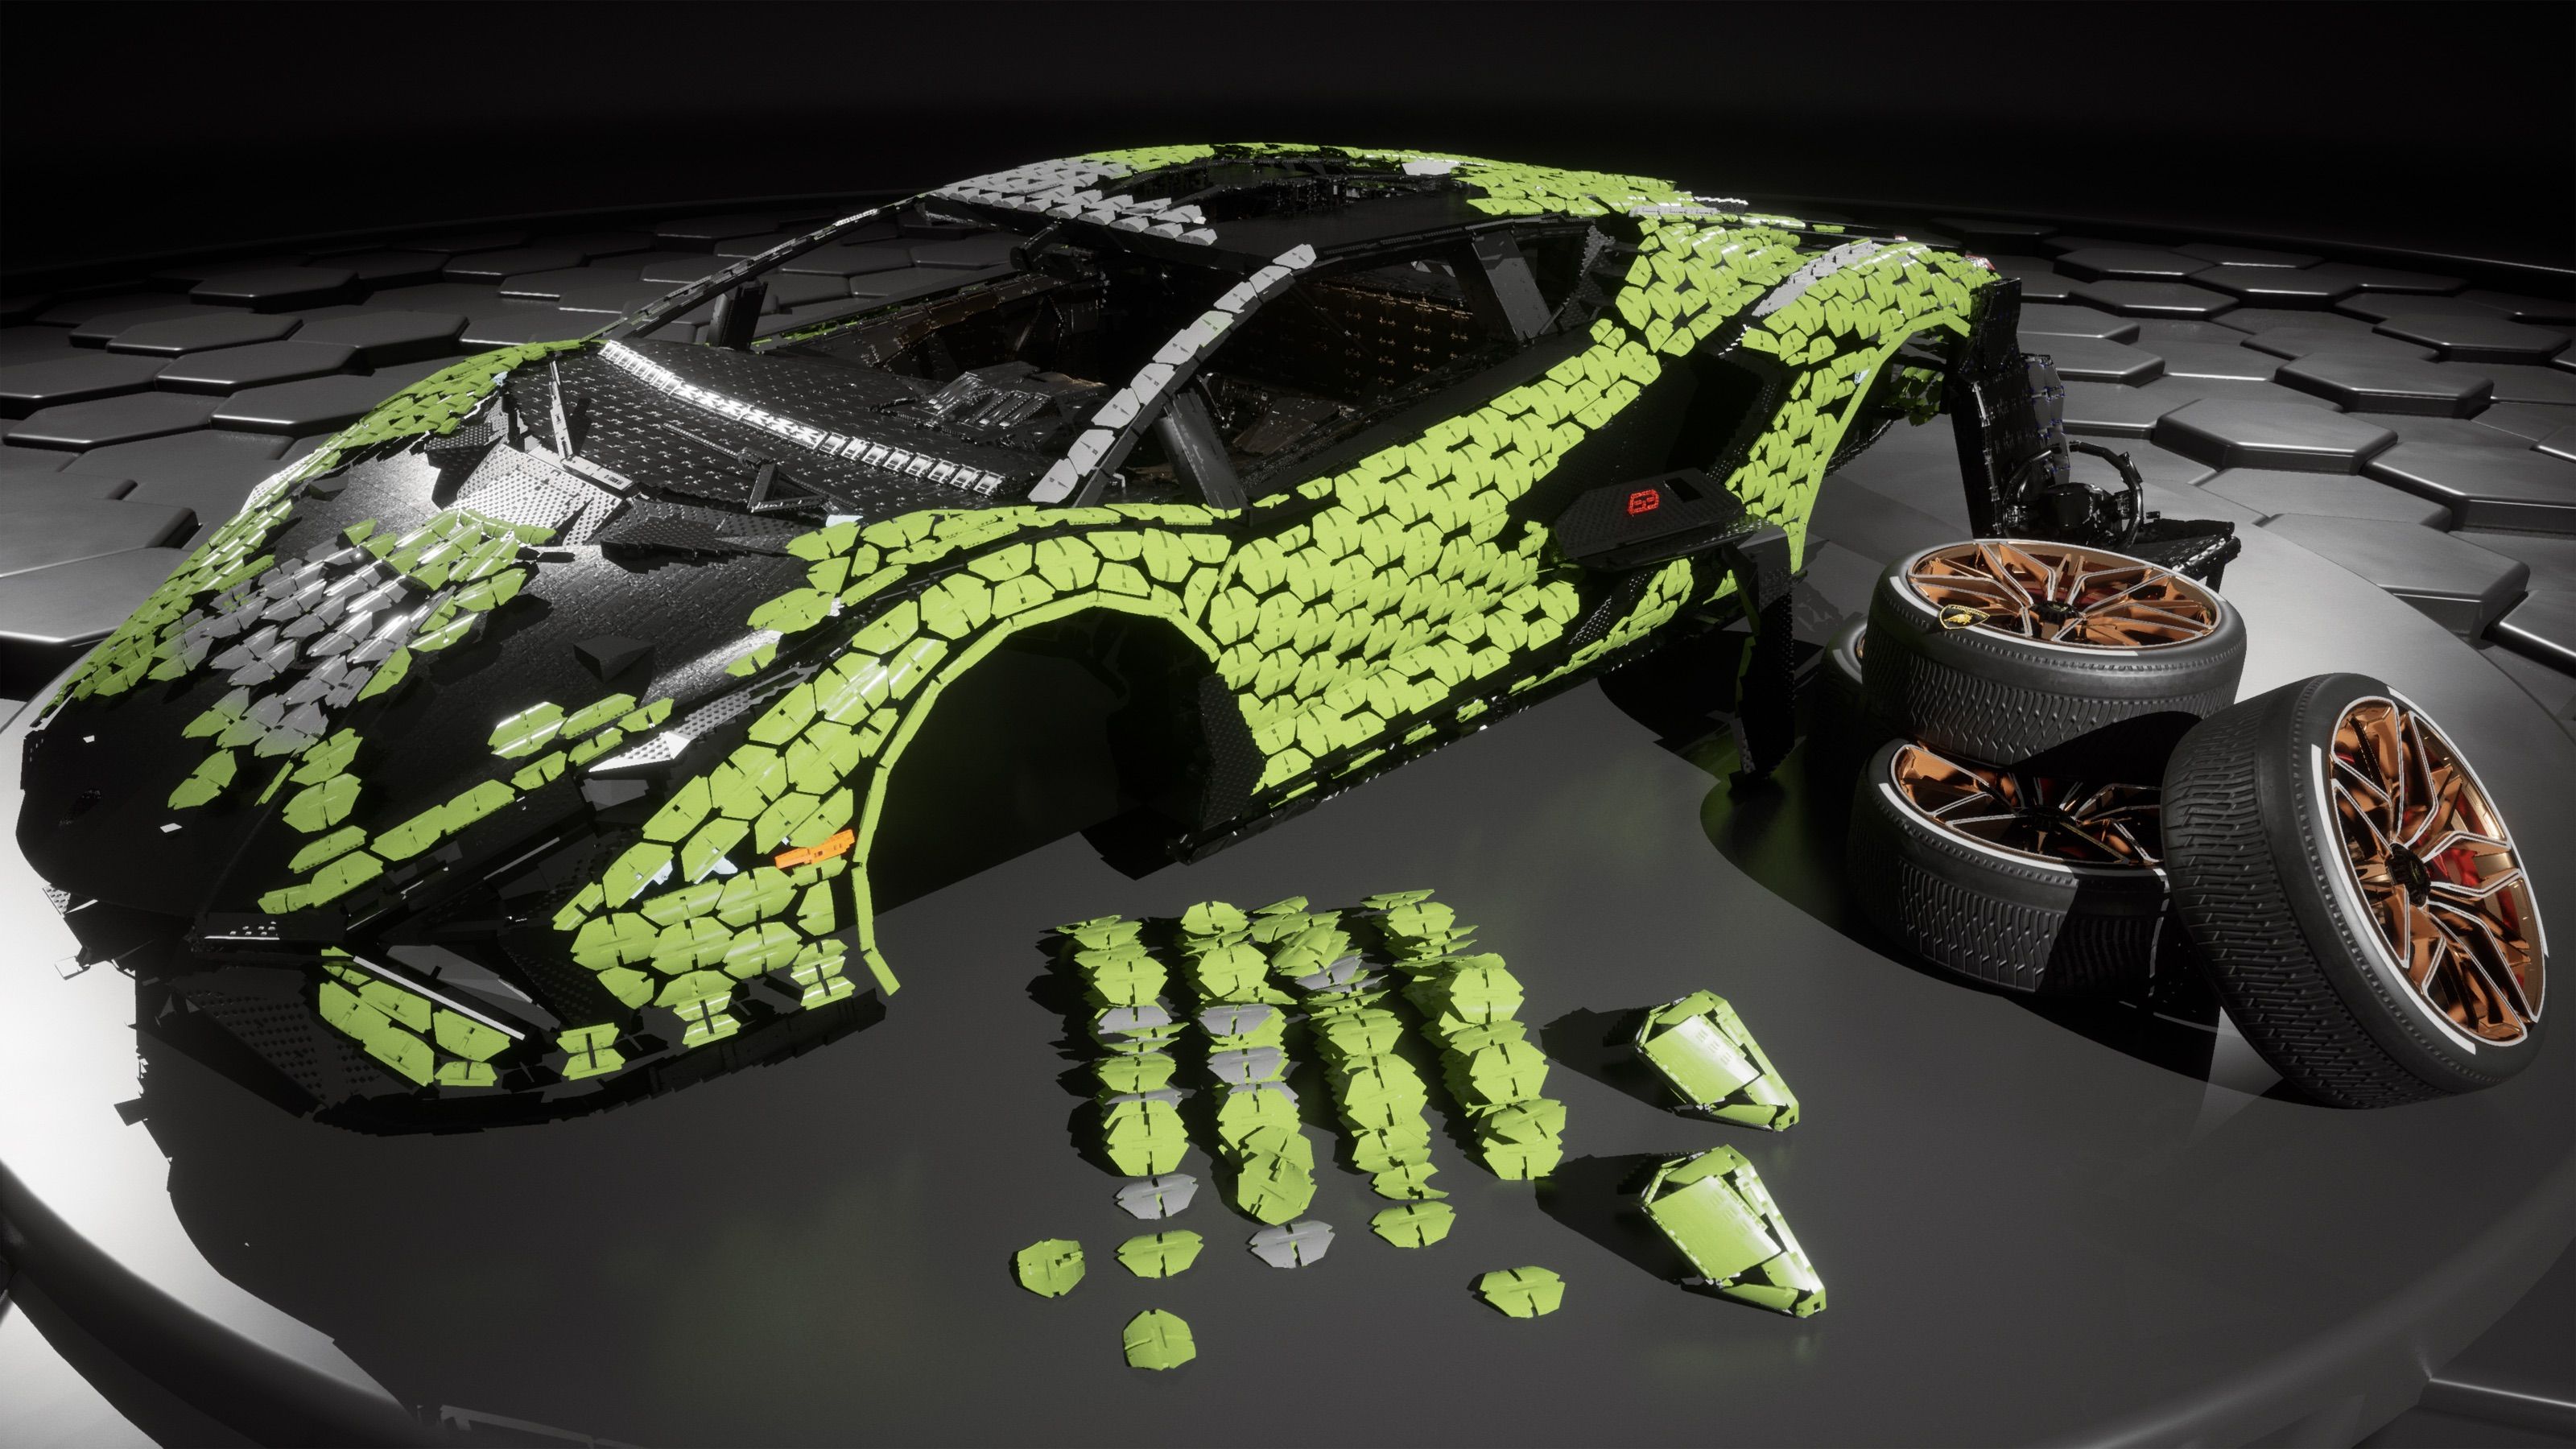 Lego's Sián 37 Is Size, Made of 400K Pieces